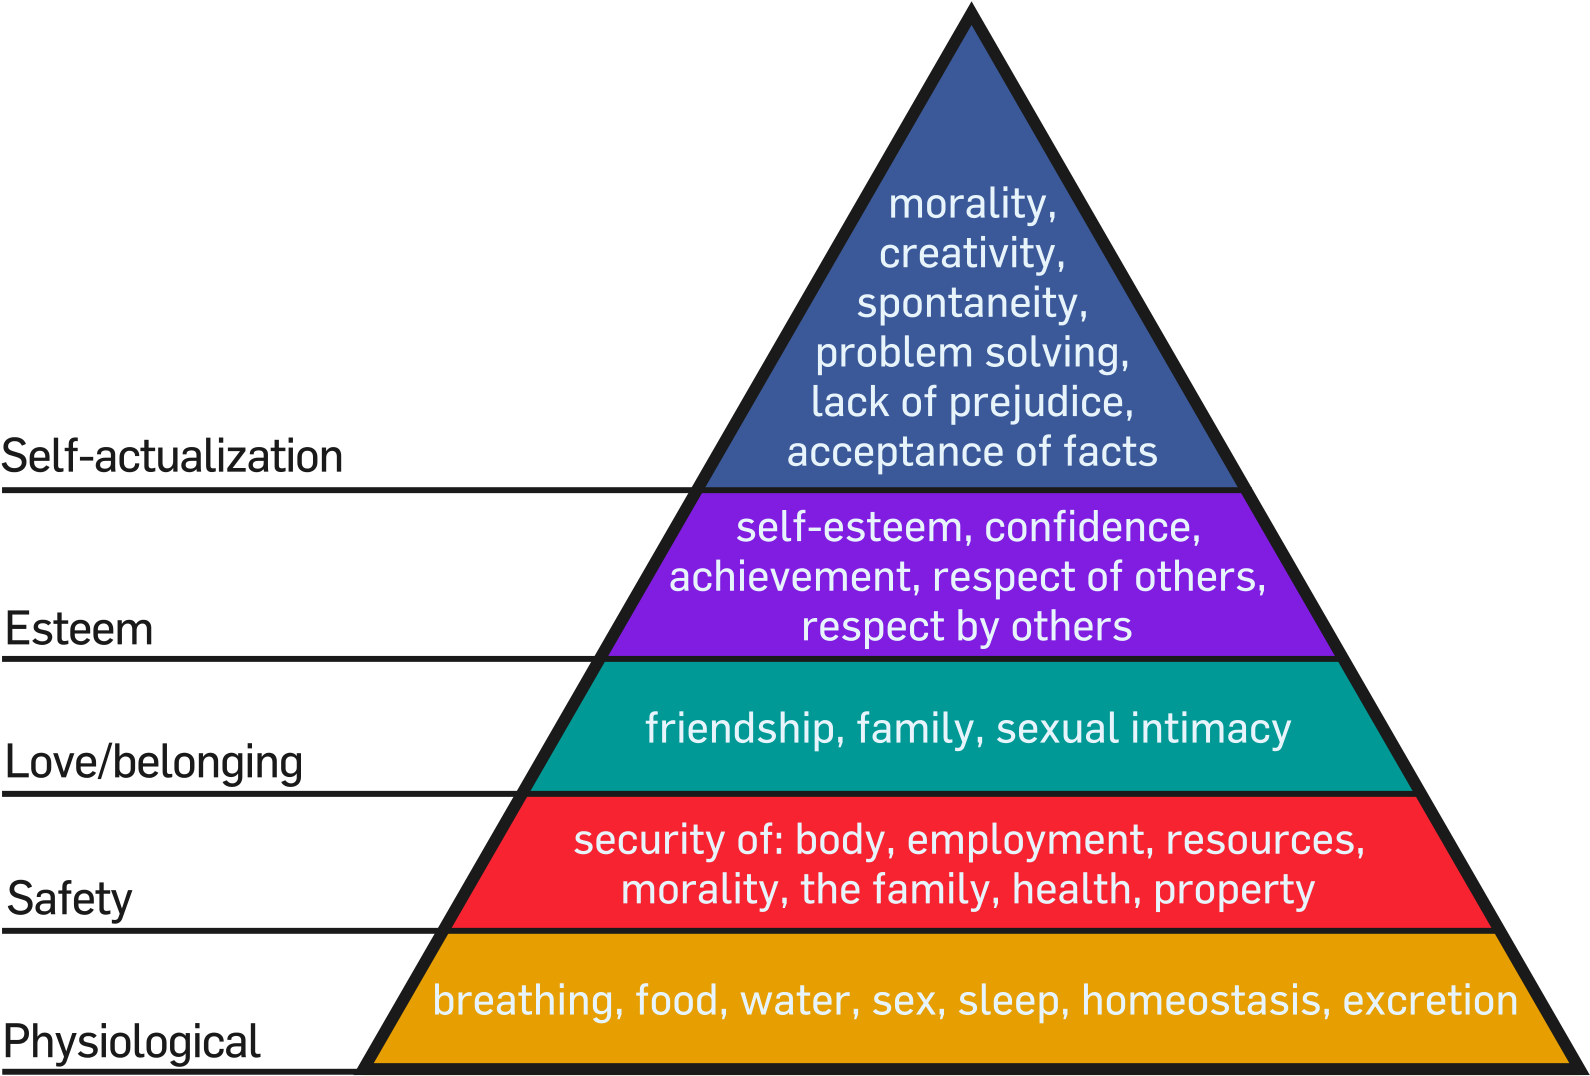 Definition Of Happiness - Maslow's Hierarchy Of Needs (1600x1200)